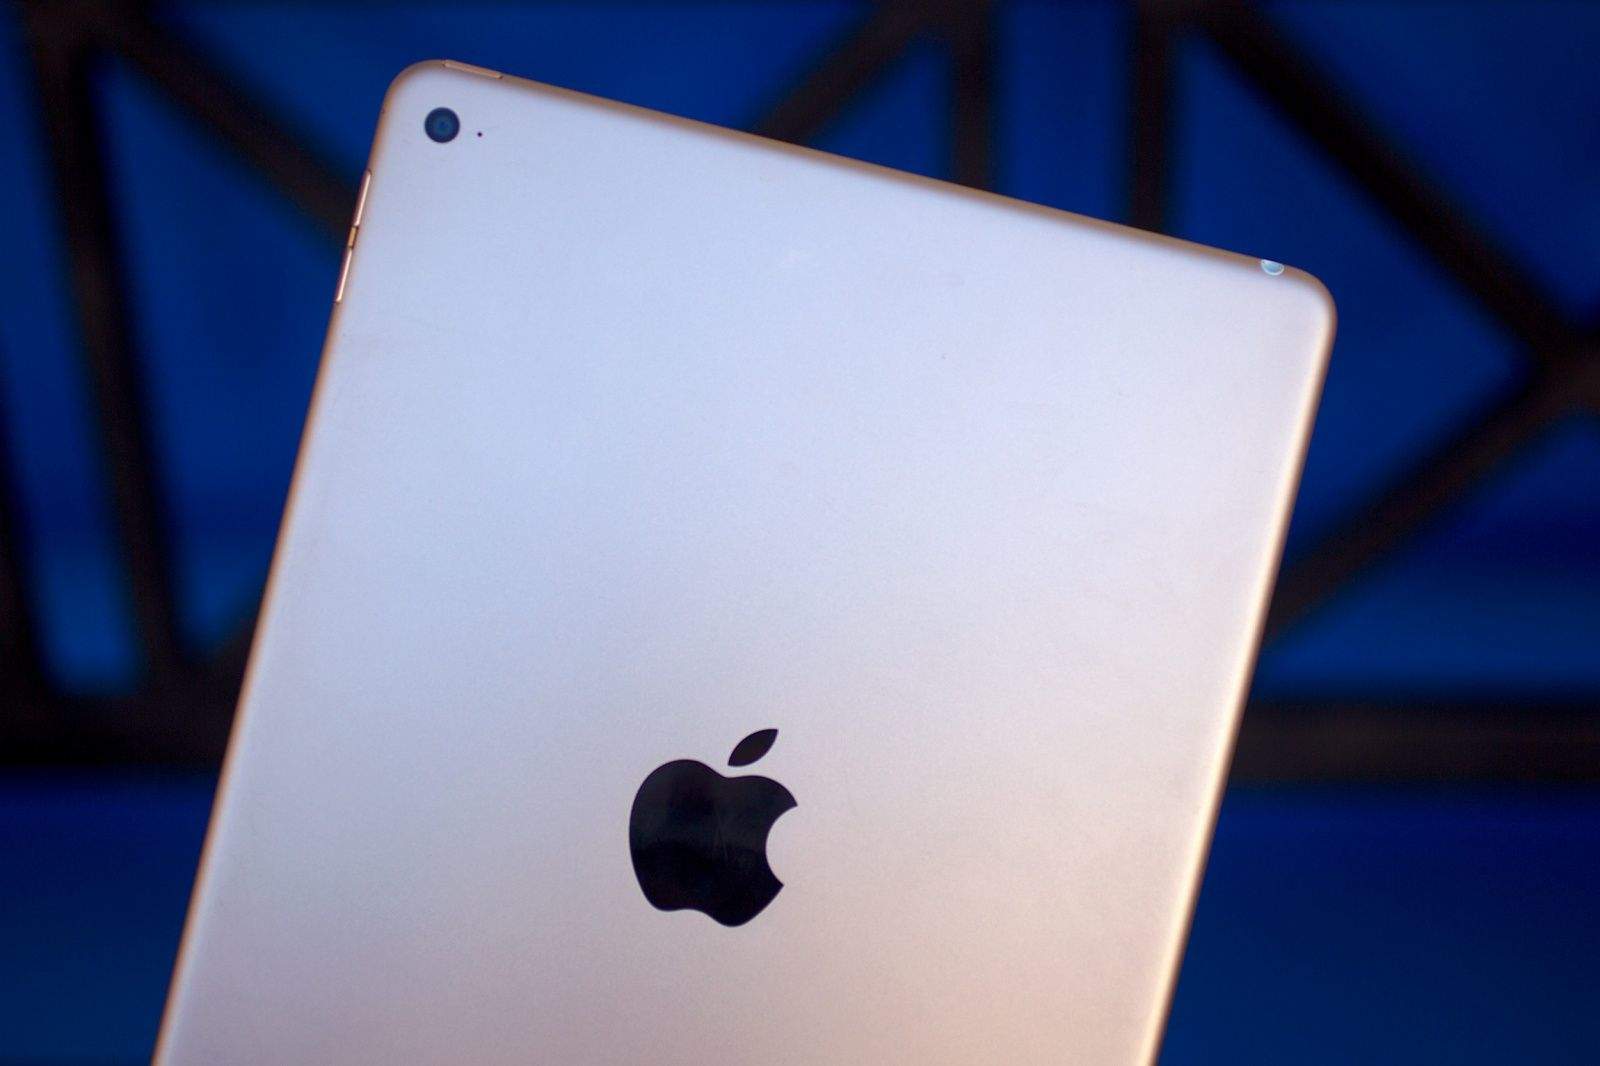 iPad Air 3 will be the smartest iPad yet.